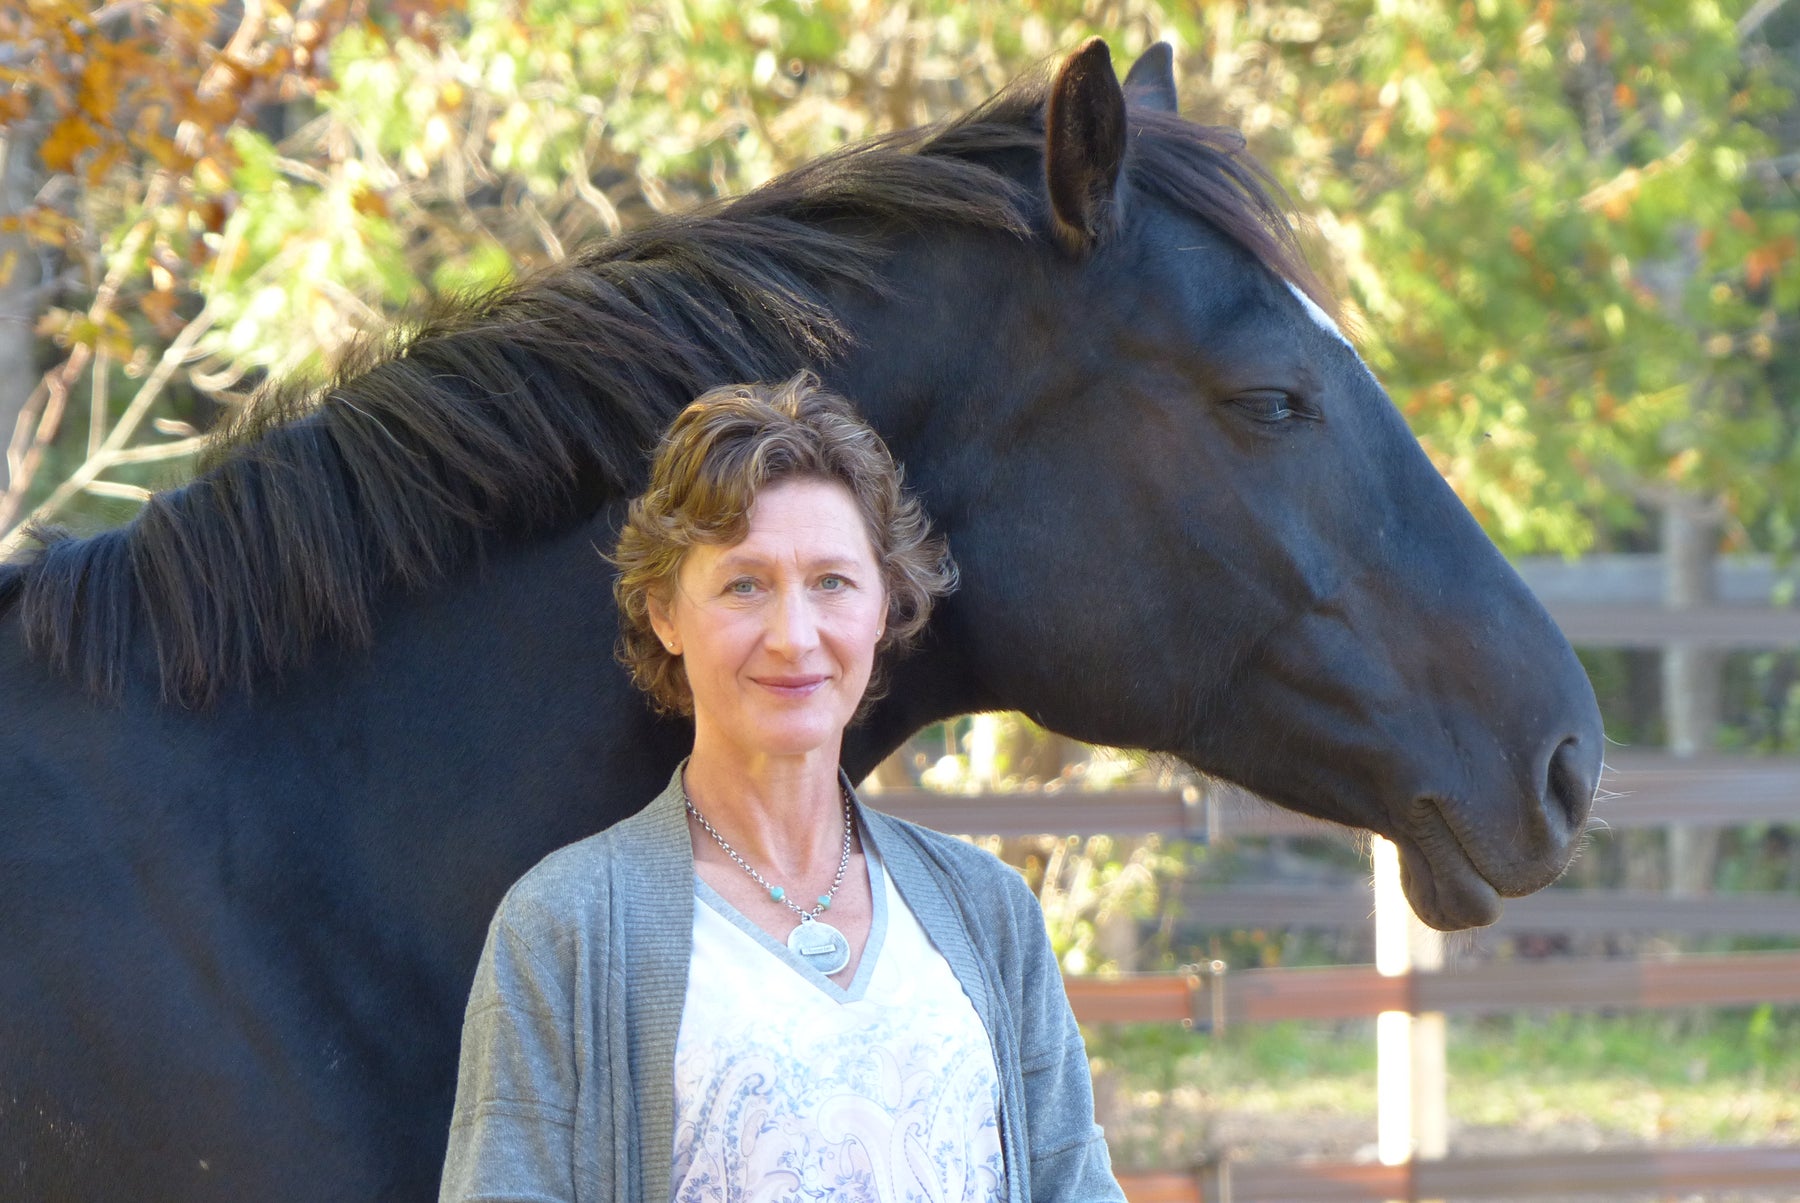 Dec 10:  A lesson from horses - Using boundaries to create presence